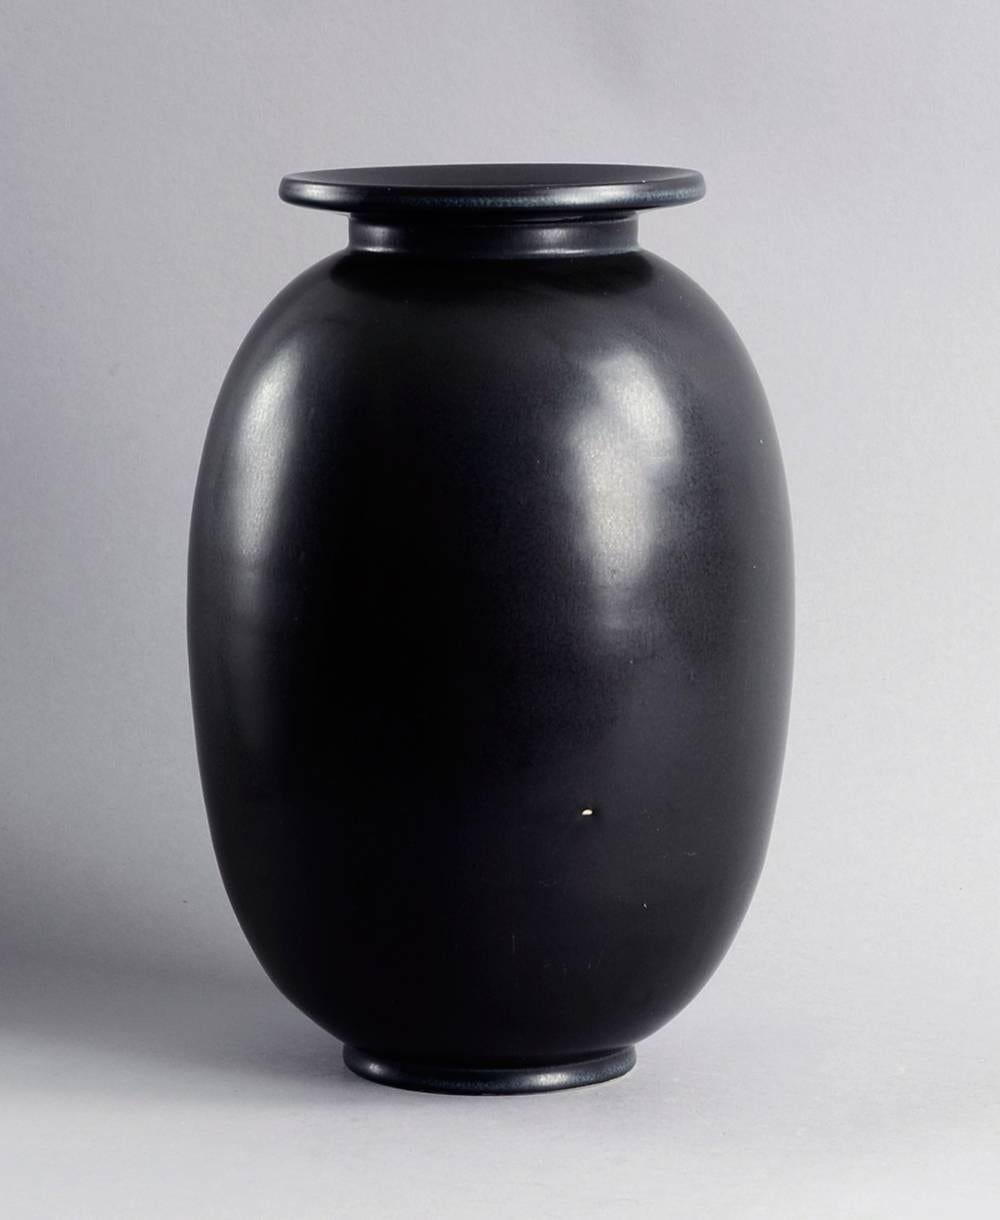 Large stoneware vase with matte black glaze by Gunnar Nylund for Rörstrand, circa 1940s.
Height 11 3/4